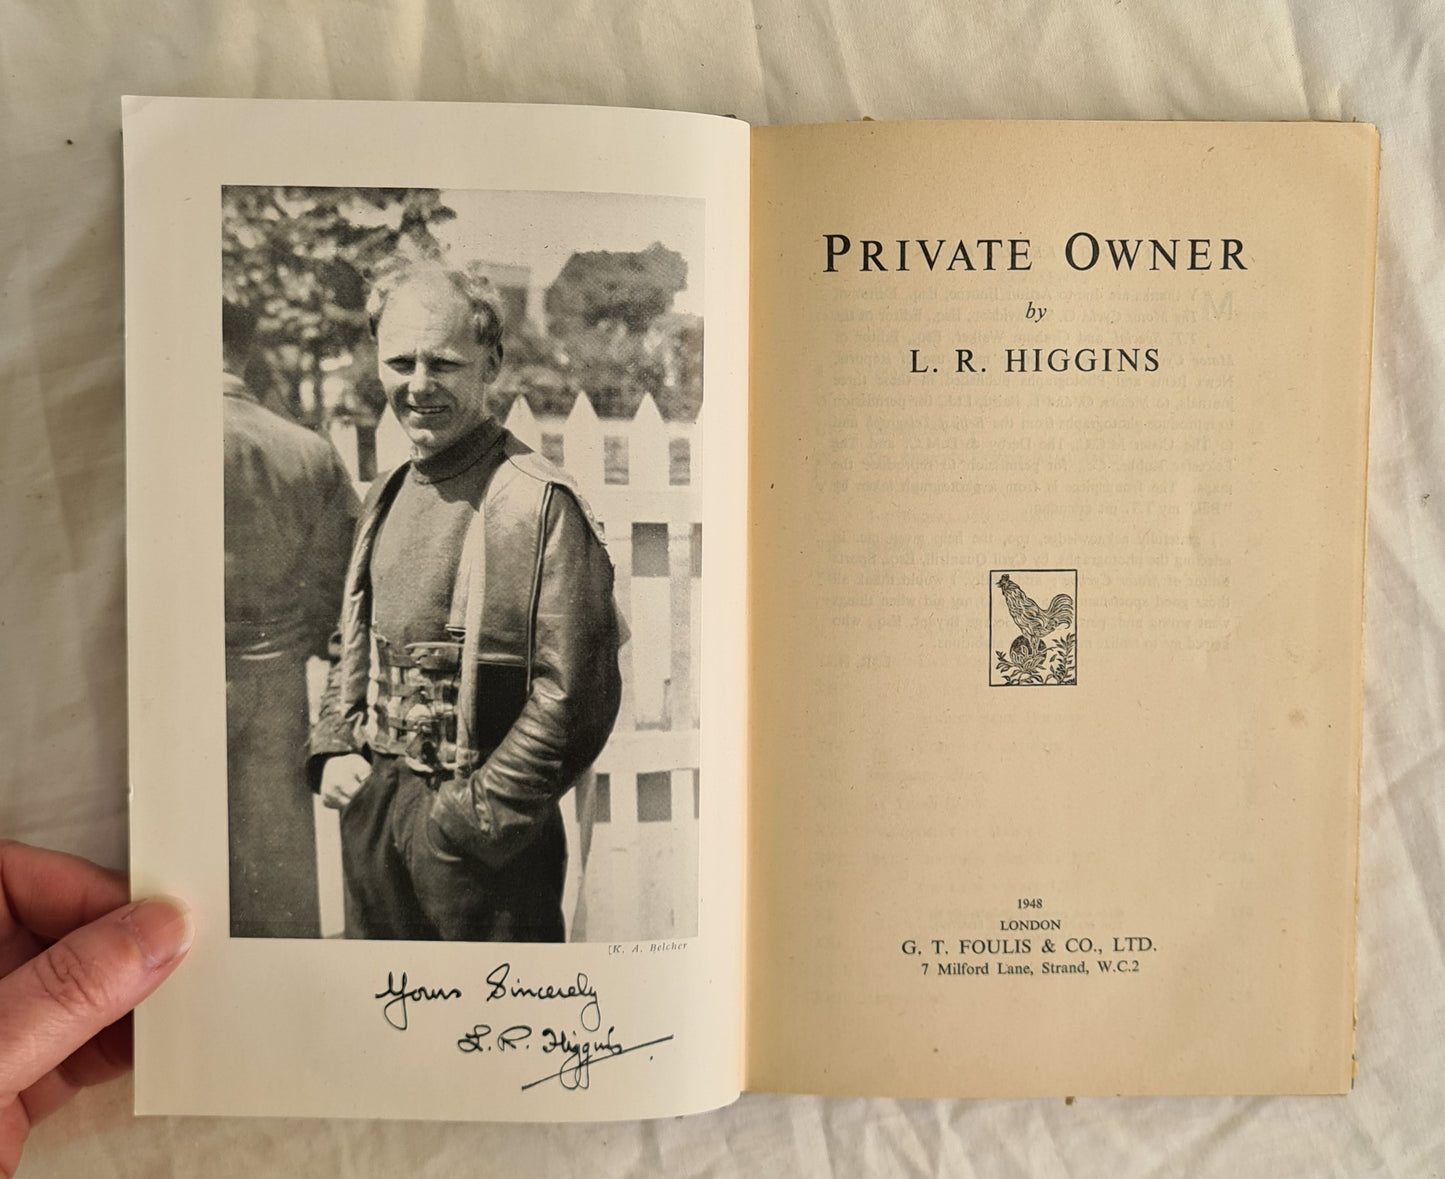 Private Owner by L. R. Higgins